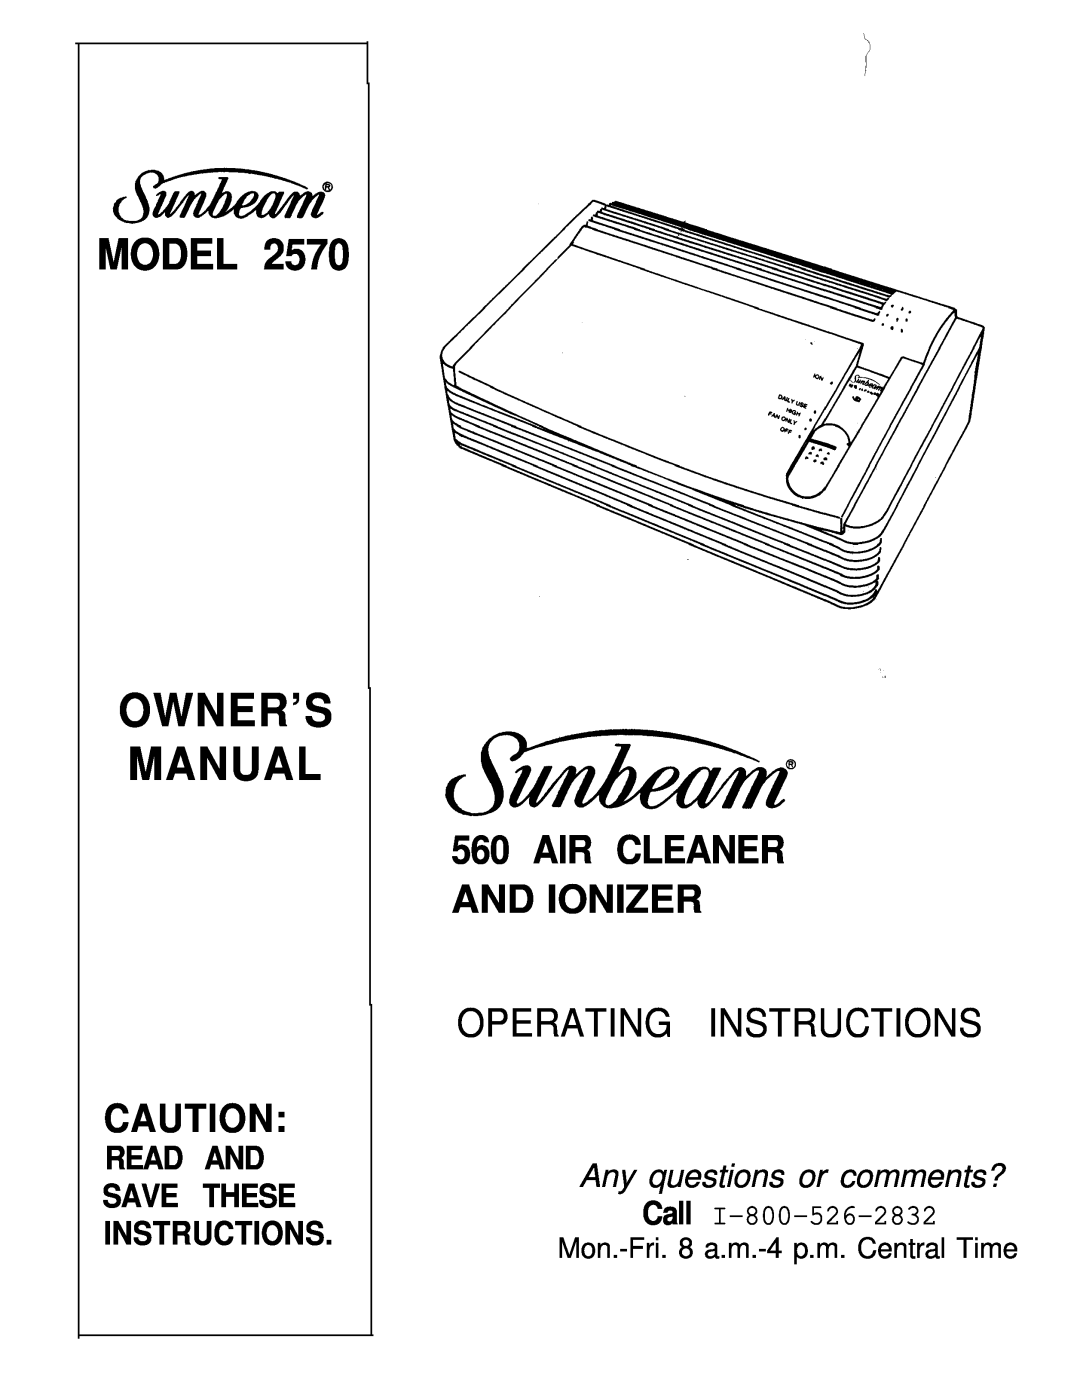 Sunbeam 2570 owner manual Model, Air Cleaner And Ionizer, Operating Instructions, Read And, Any questions or comments? 